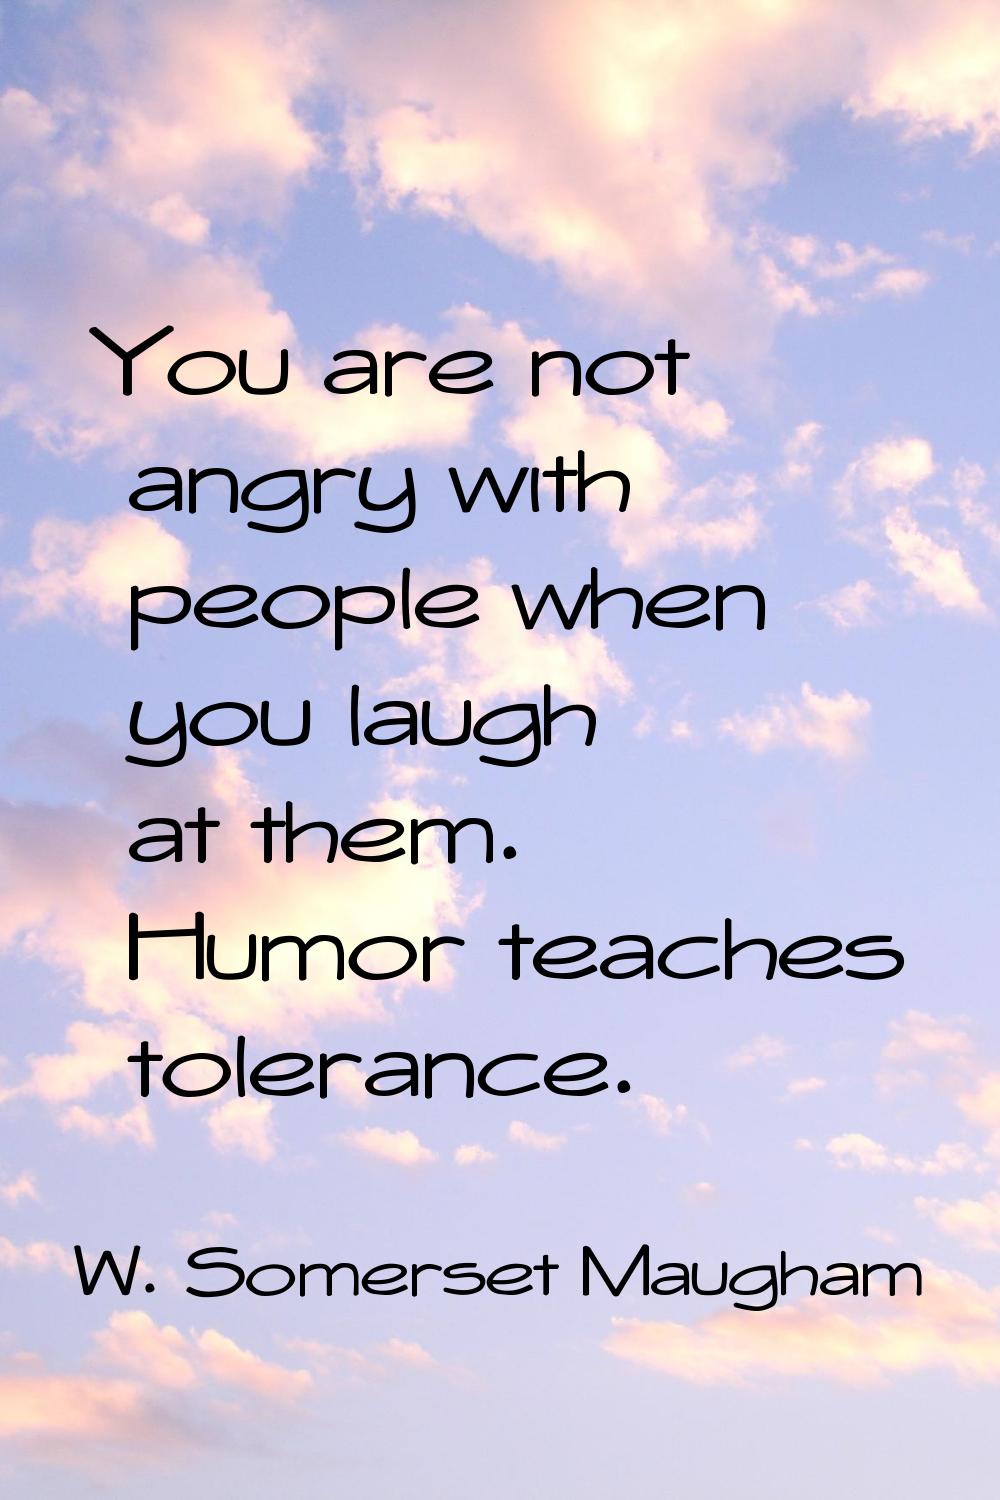 You are not angry with people when you laugh at them. Humor teaches tolerance.